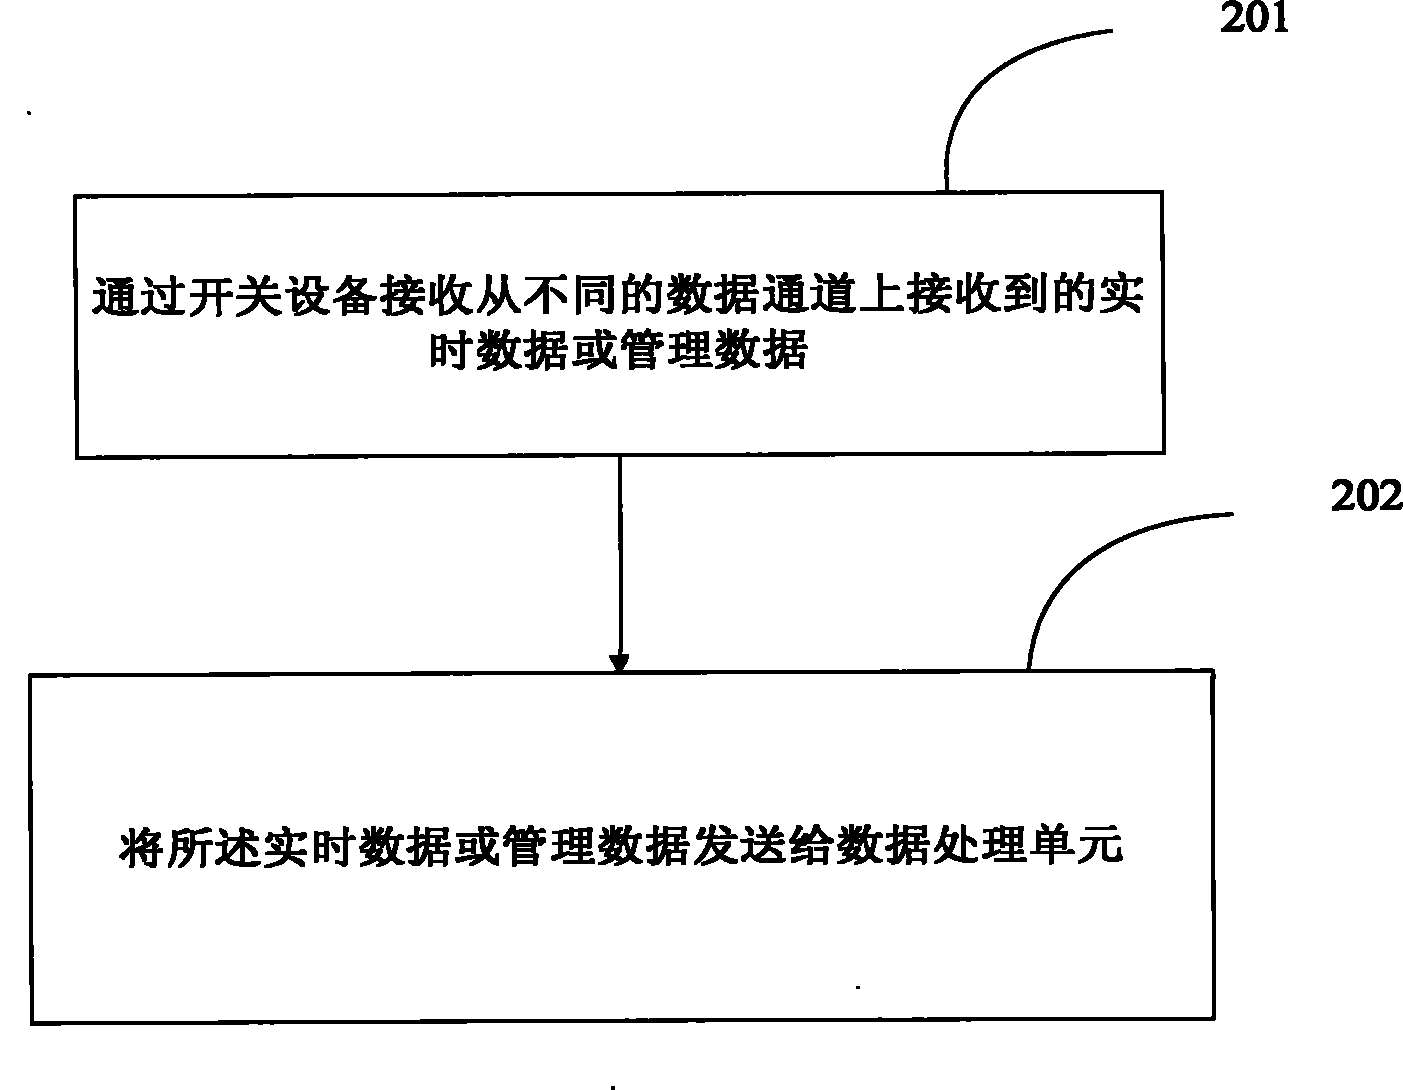 Method and interface for high-speed communication on bus